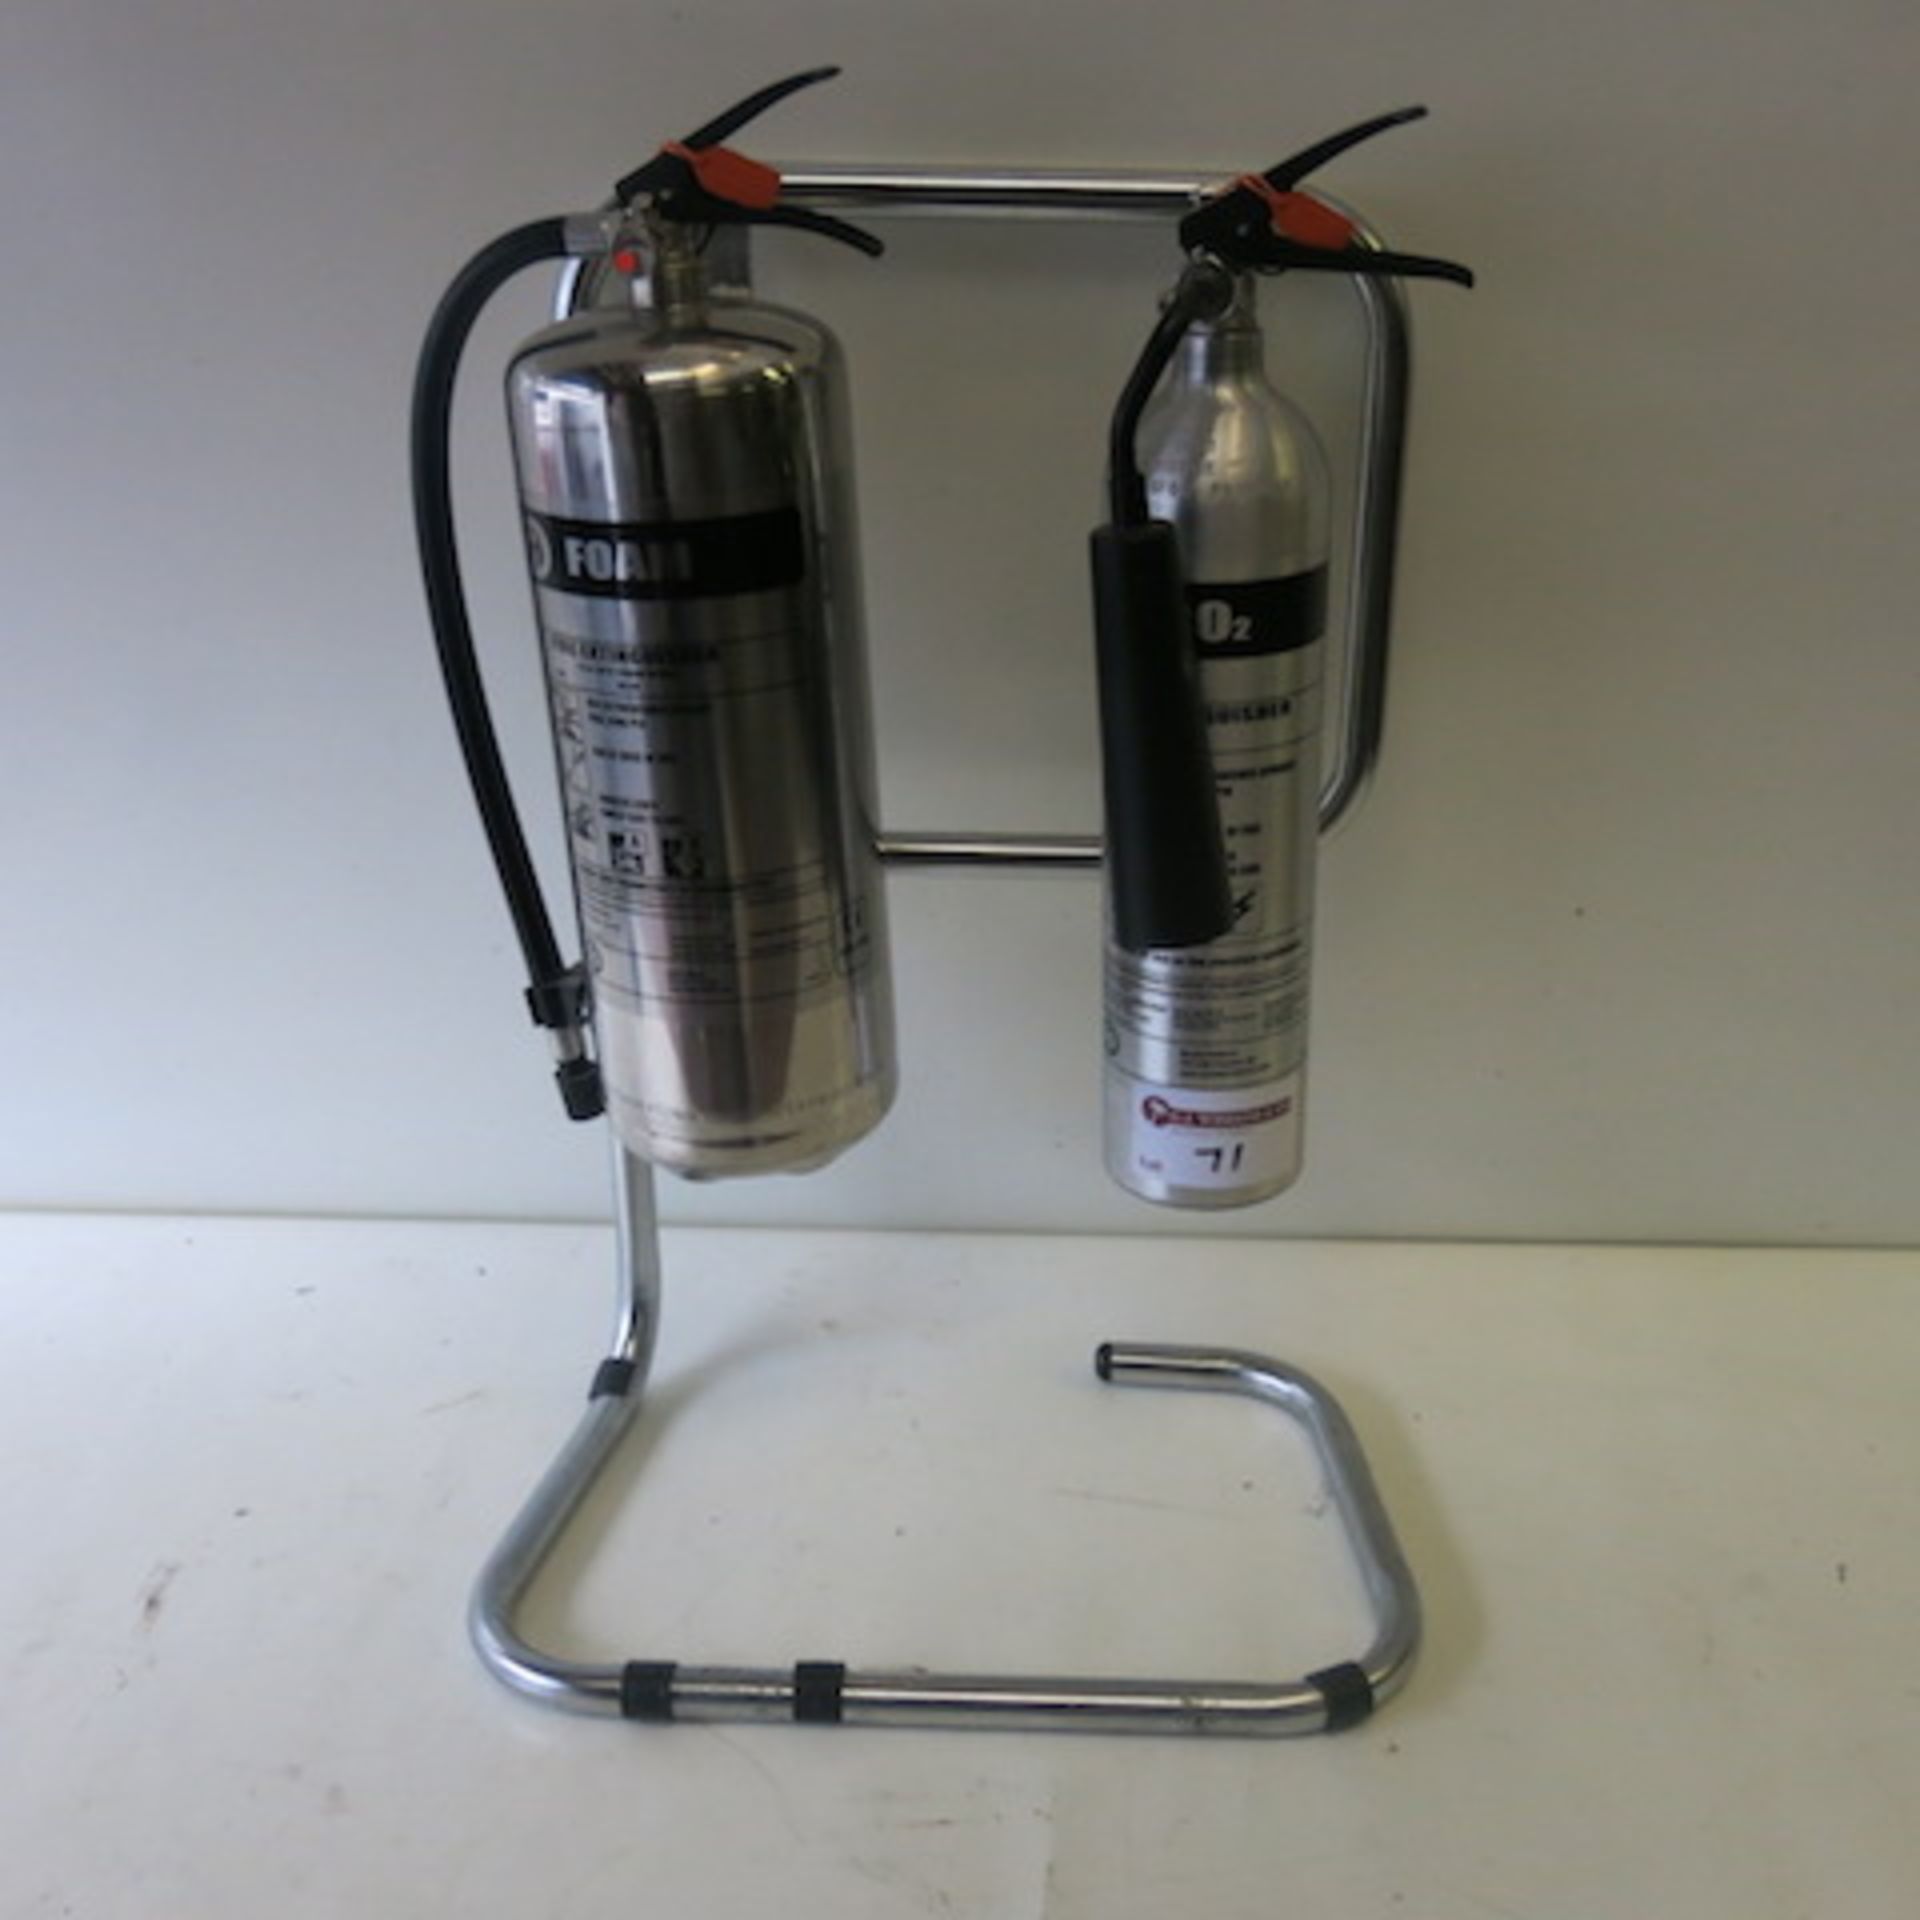 2 x Stainless Steel/Aluminum Fire Extinguishers on Frame, 1 Foam, 1 Carbon Dioxide, Discharge Date